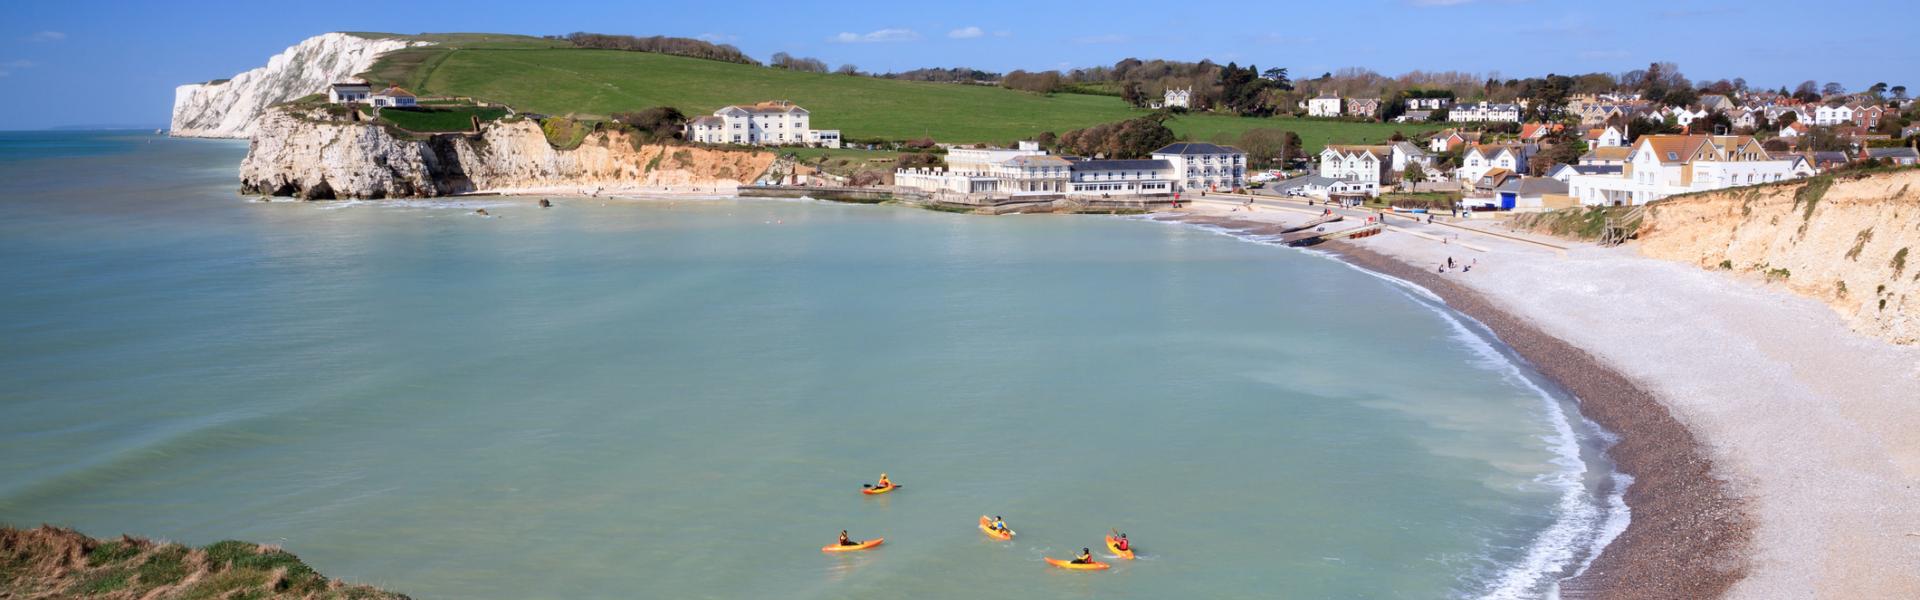 Holiday lettings & accommodation in Bonchurch - HomeToGo